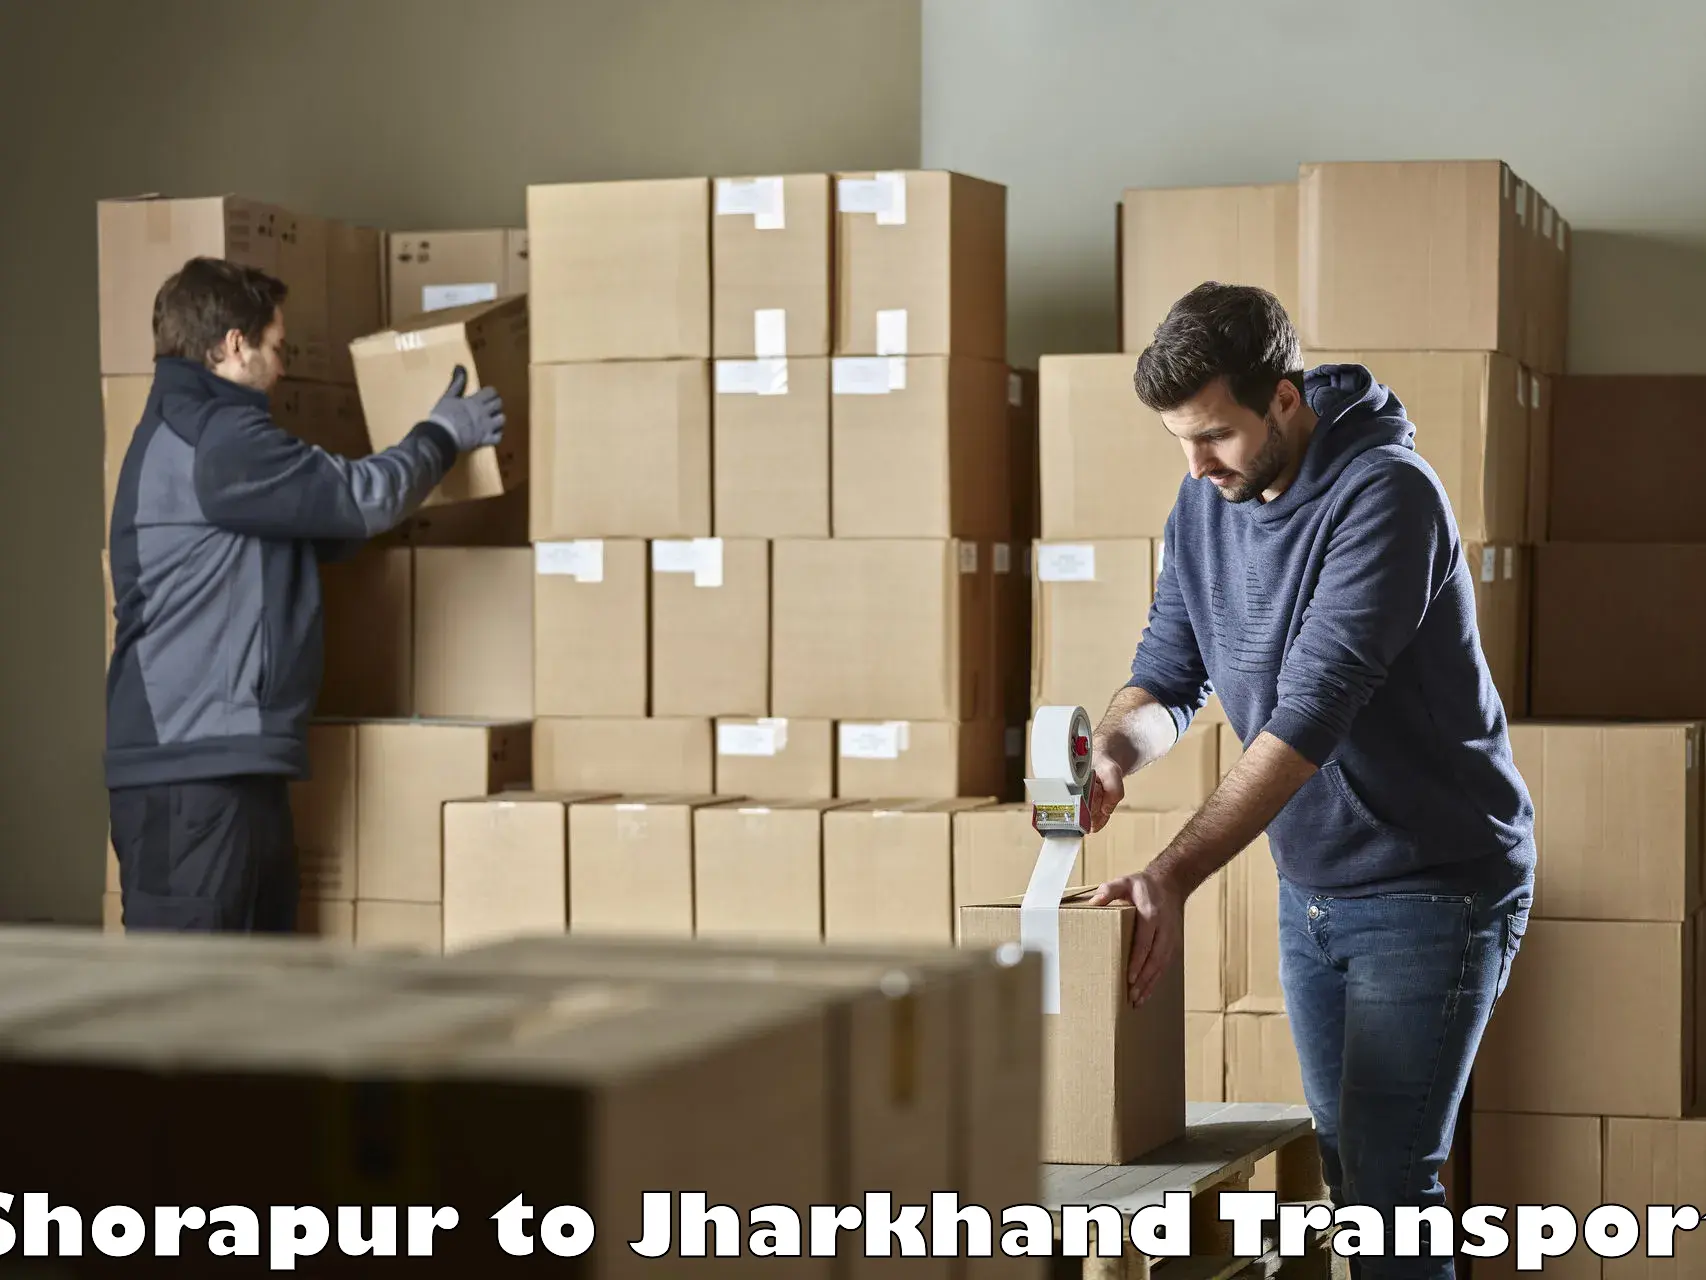 Vehicle transport services Shorapur to Jharkhand